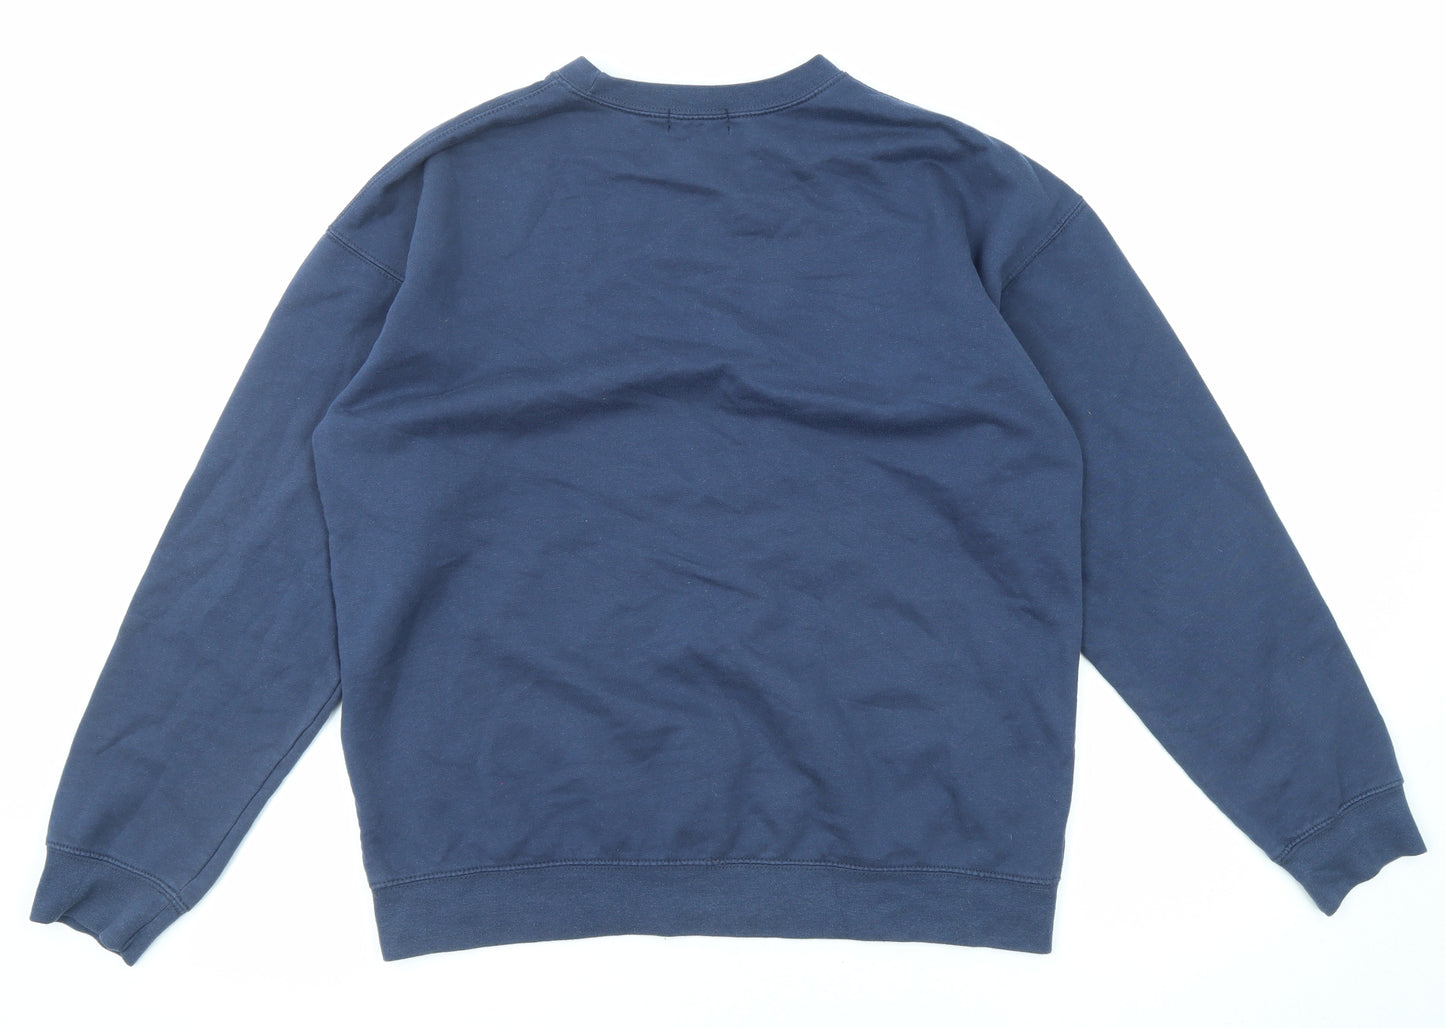 PRETTYLITTLETHING Womens Blue Cotton Pullover Sweatshirt Size S Pullover - Brooklyn